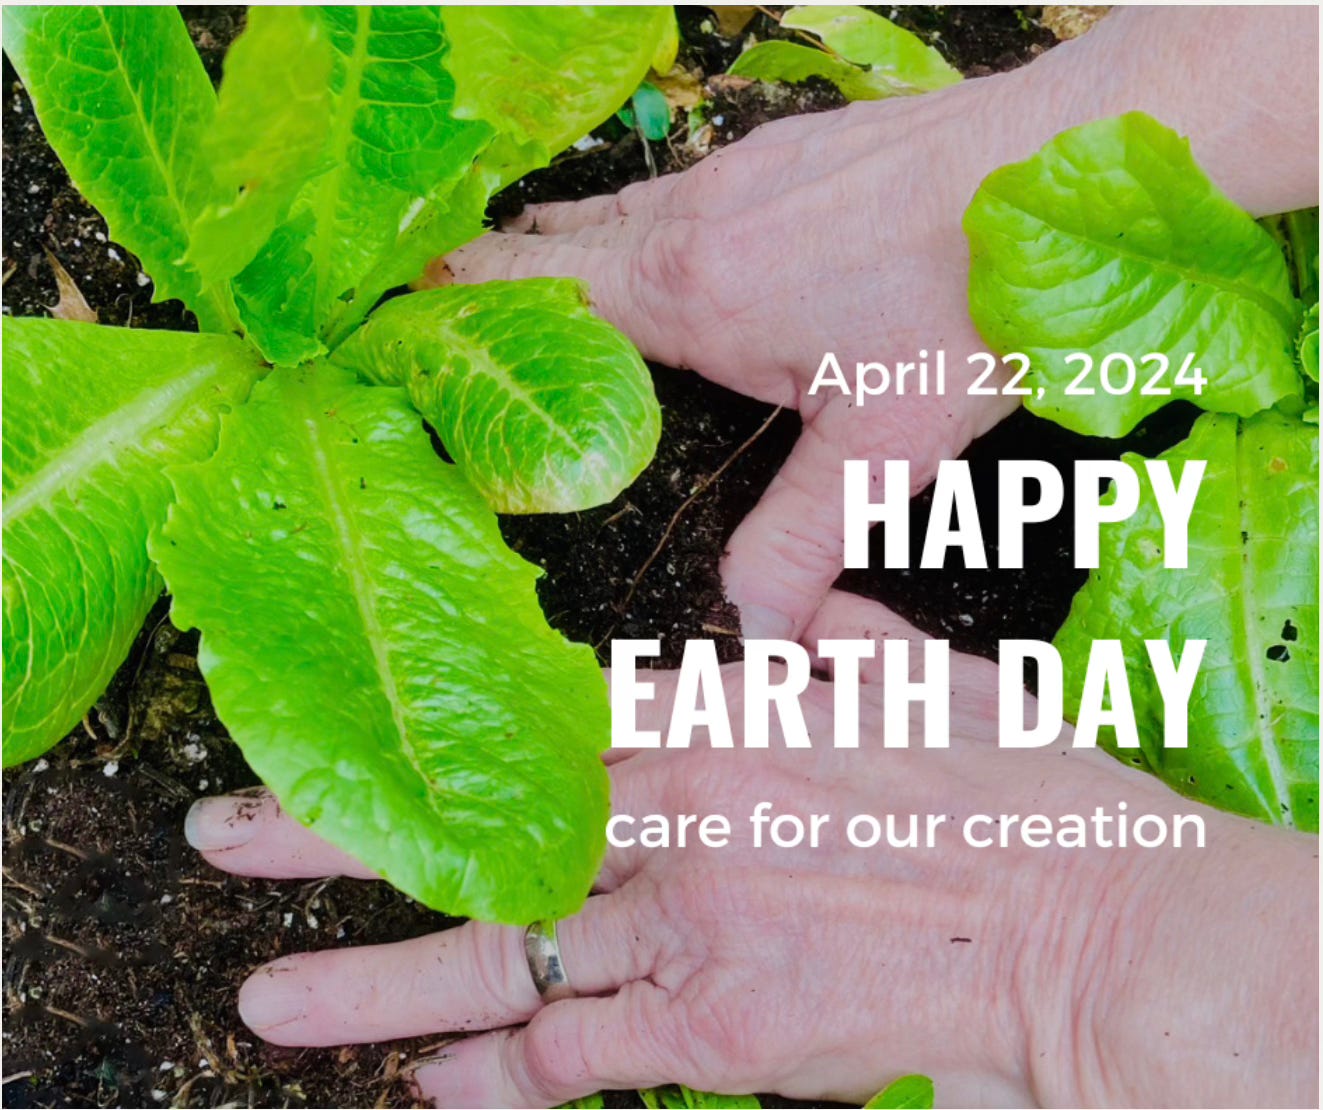 Image of hands in garden soil with young lettuce. Wording says Happy Earth Day April 22 2024 - care for our creation.